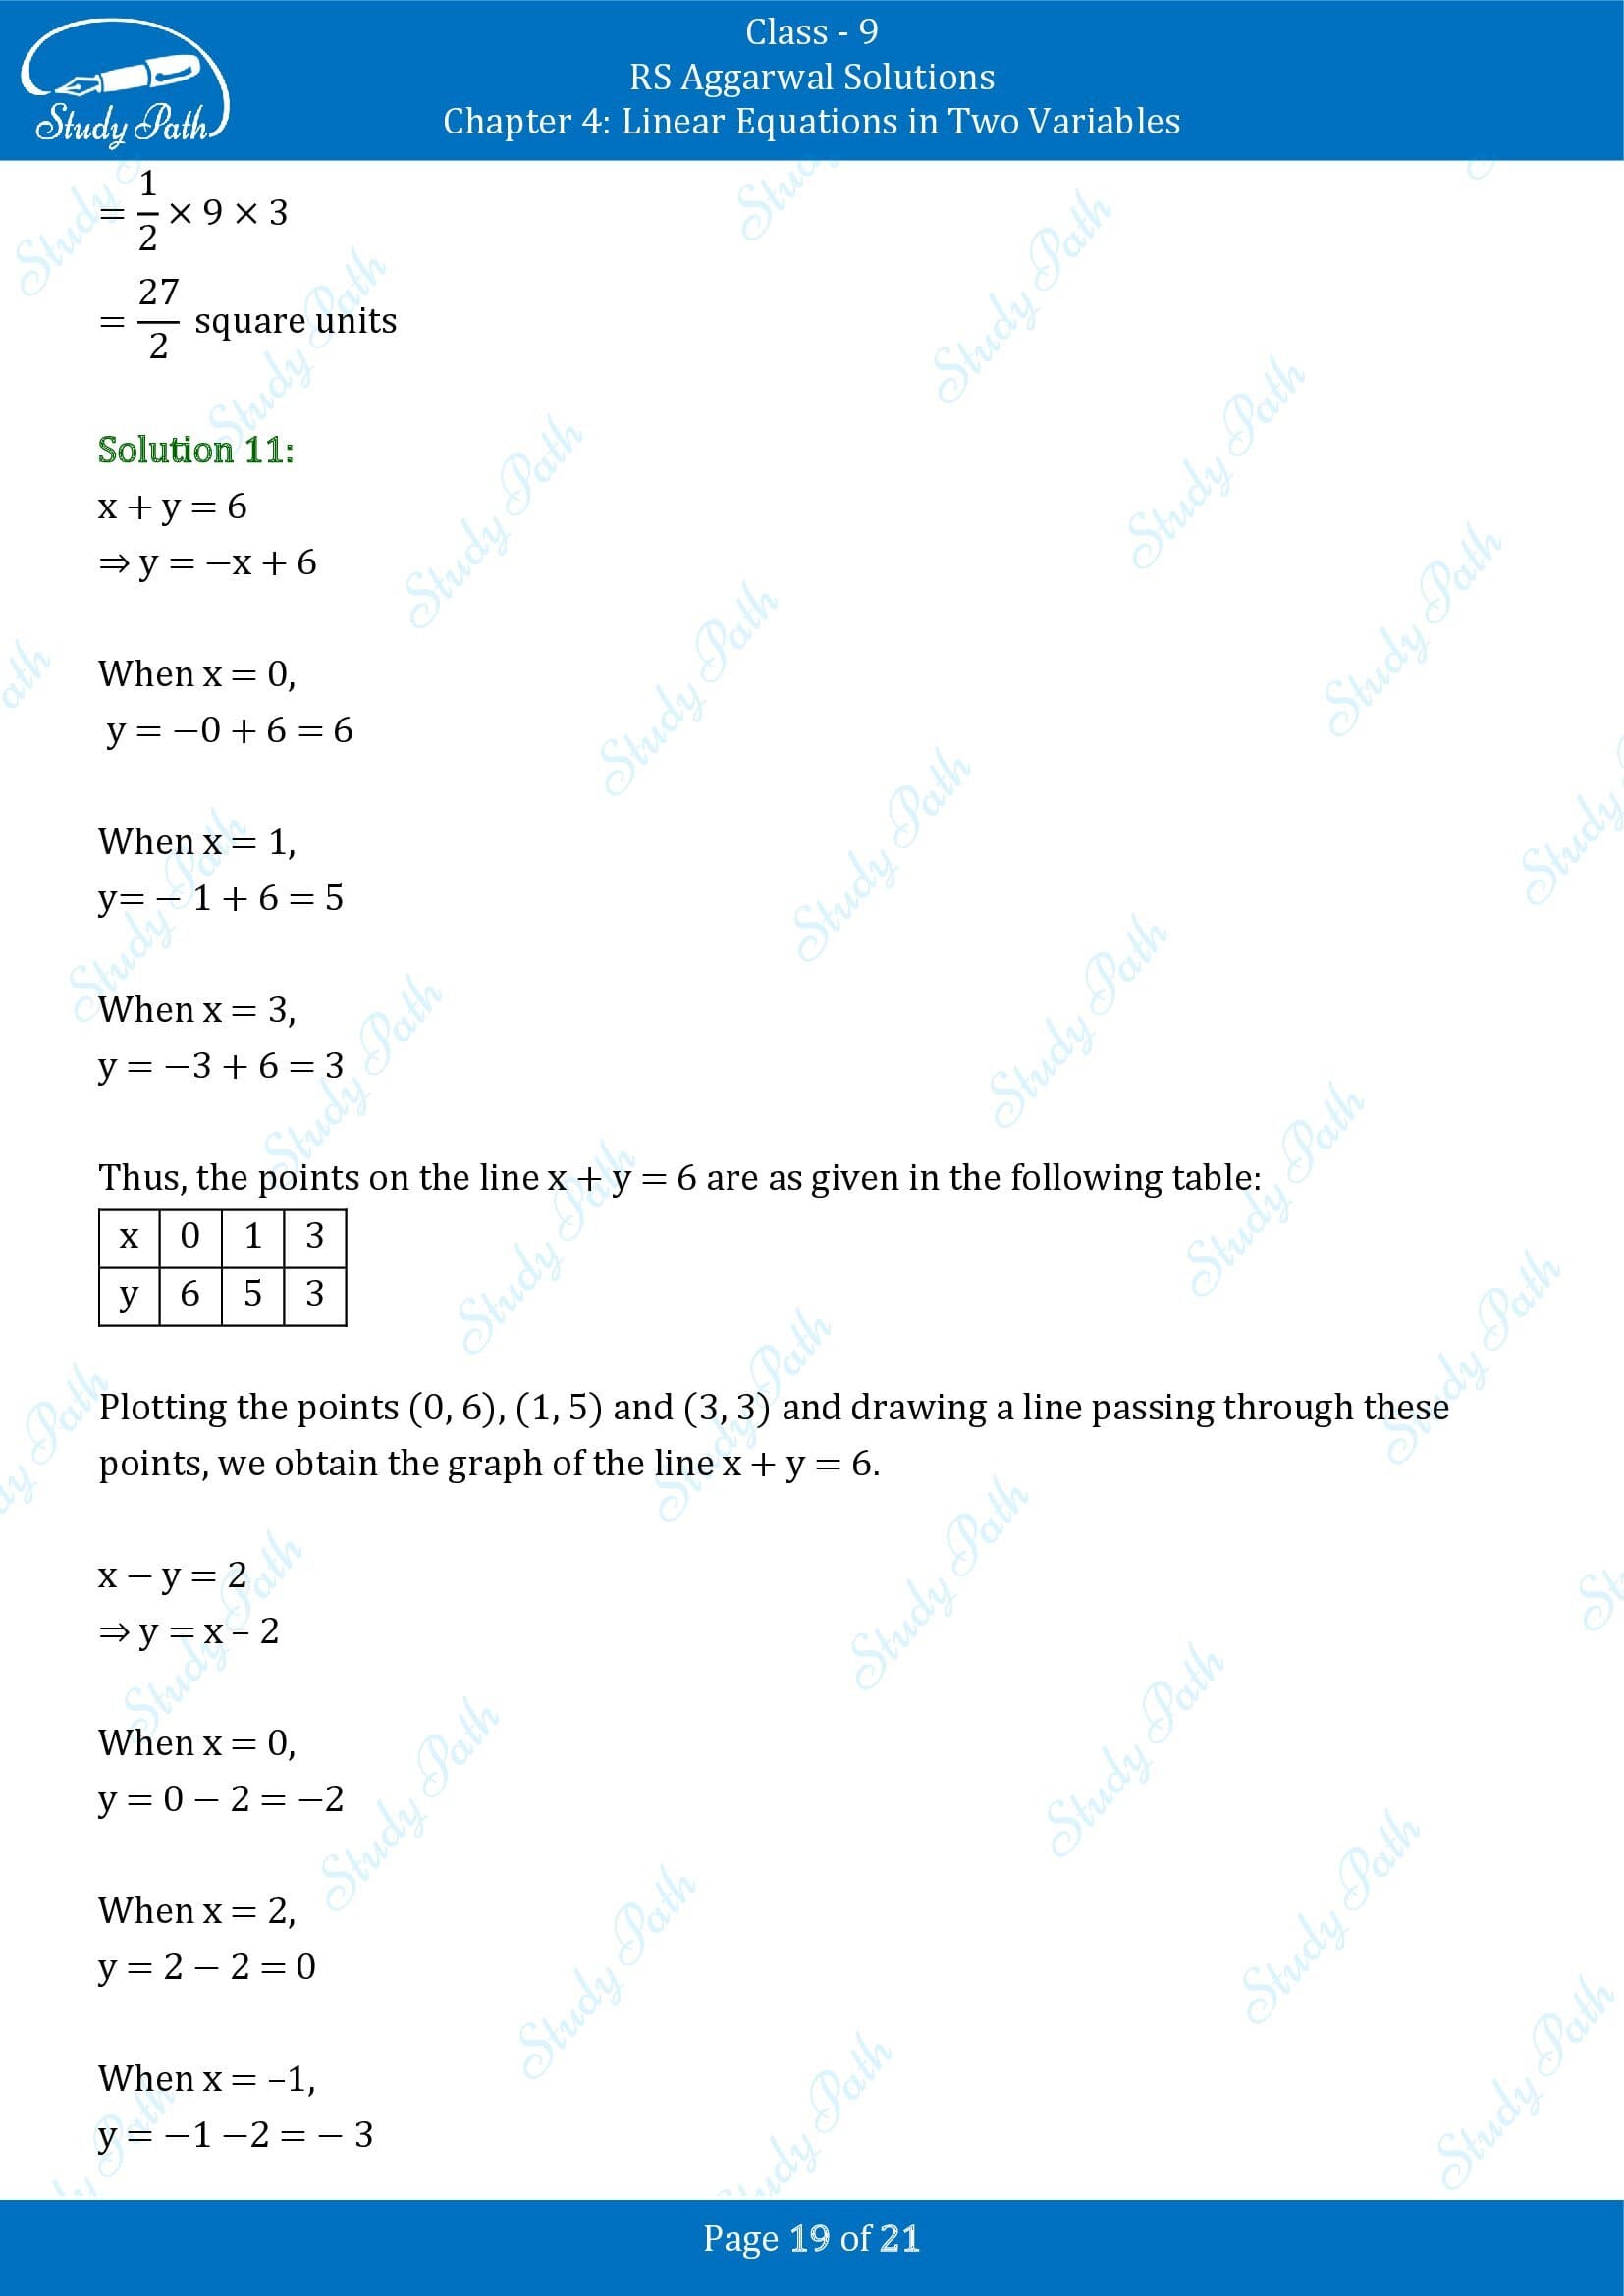 RS Aggarwal Solutions Class 9 Chapter 4 Linear Equations in Two Variables Exercise 4B 00019